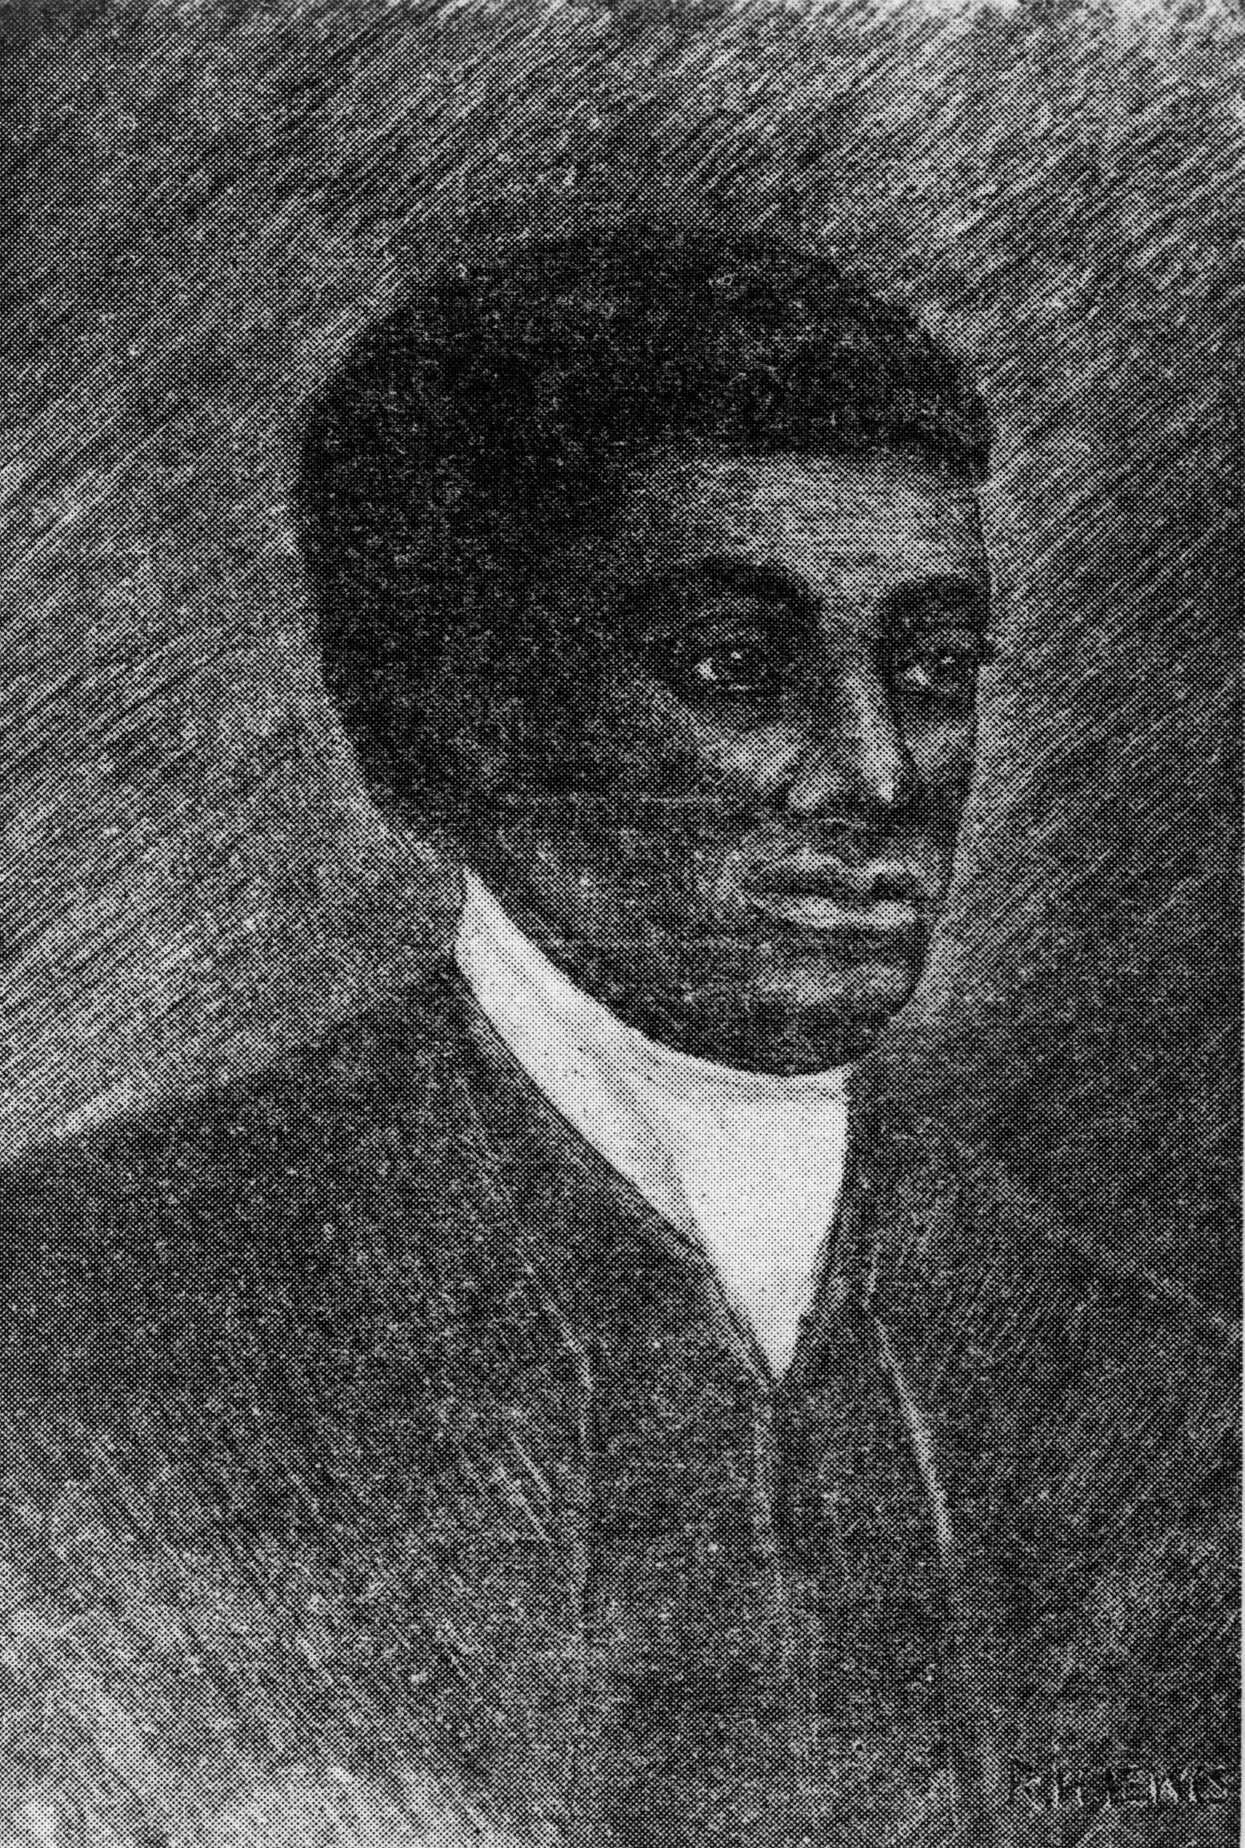 A hand drawn black and white portrait of Benjamin Banneker.